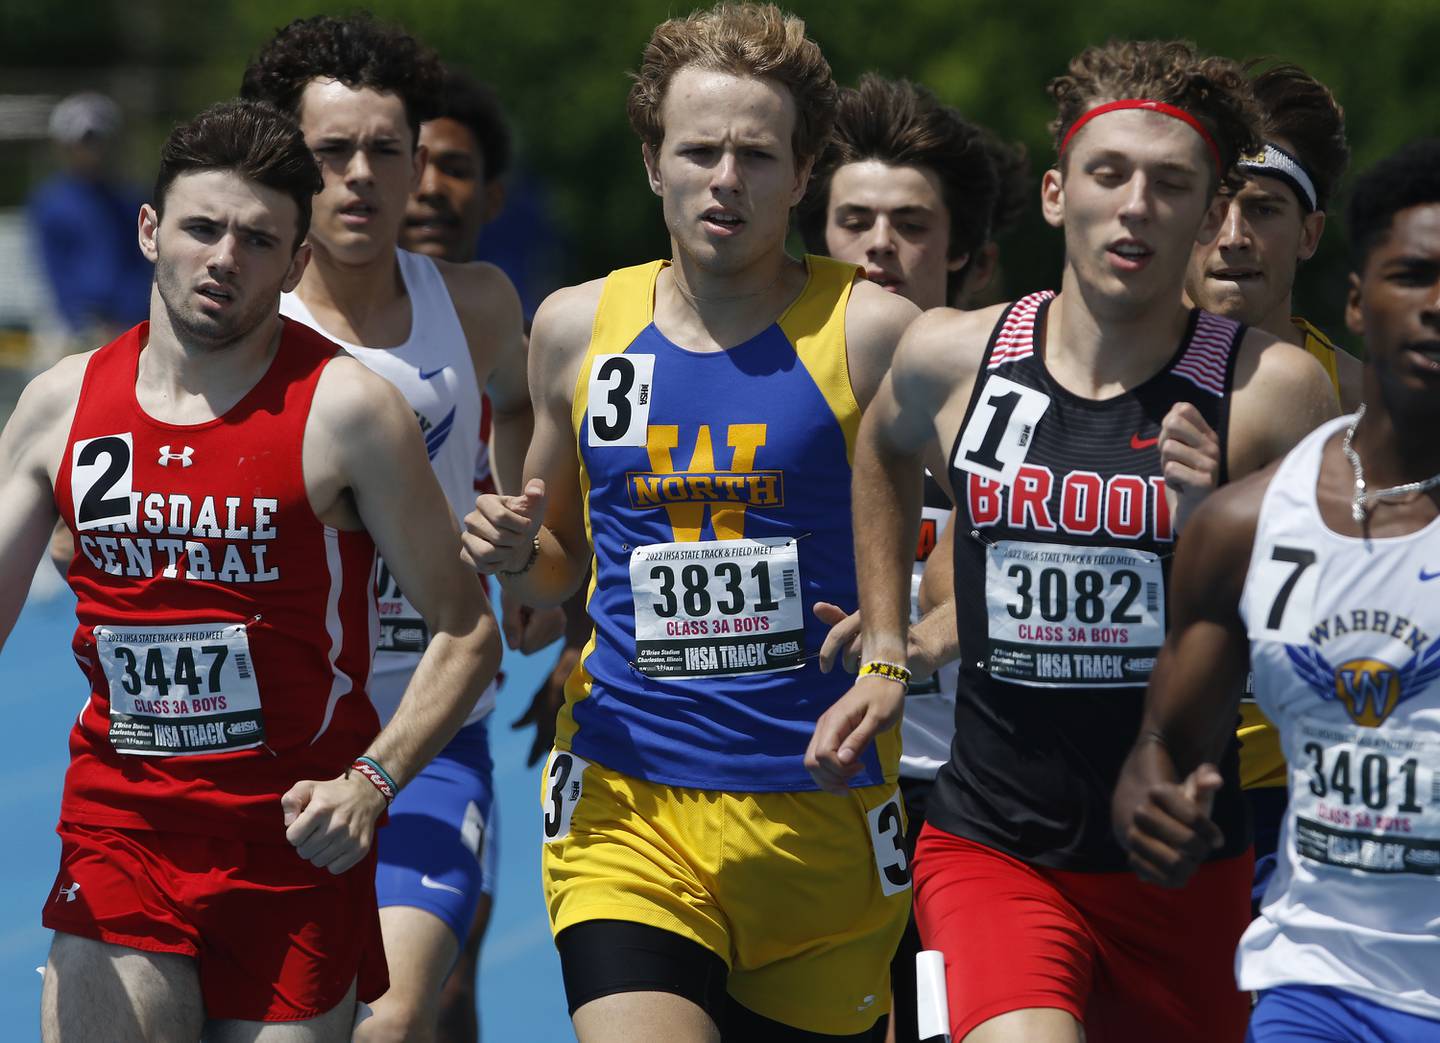 Hinsdale Central’s Daniel Watcke, Wheaton’s Ryan Schreiner, and Bolingbrook’s Brett Wasick battle for position as they compete in the 800 meter run during the IHSA Class 3A State Track and Field Championships Saturday, May 28, 2022, at Eastern Illinois University in Charleston.